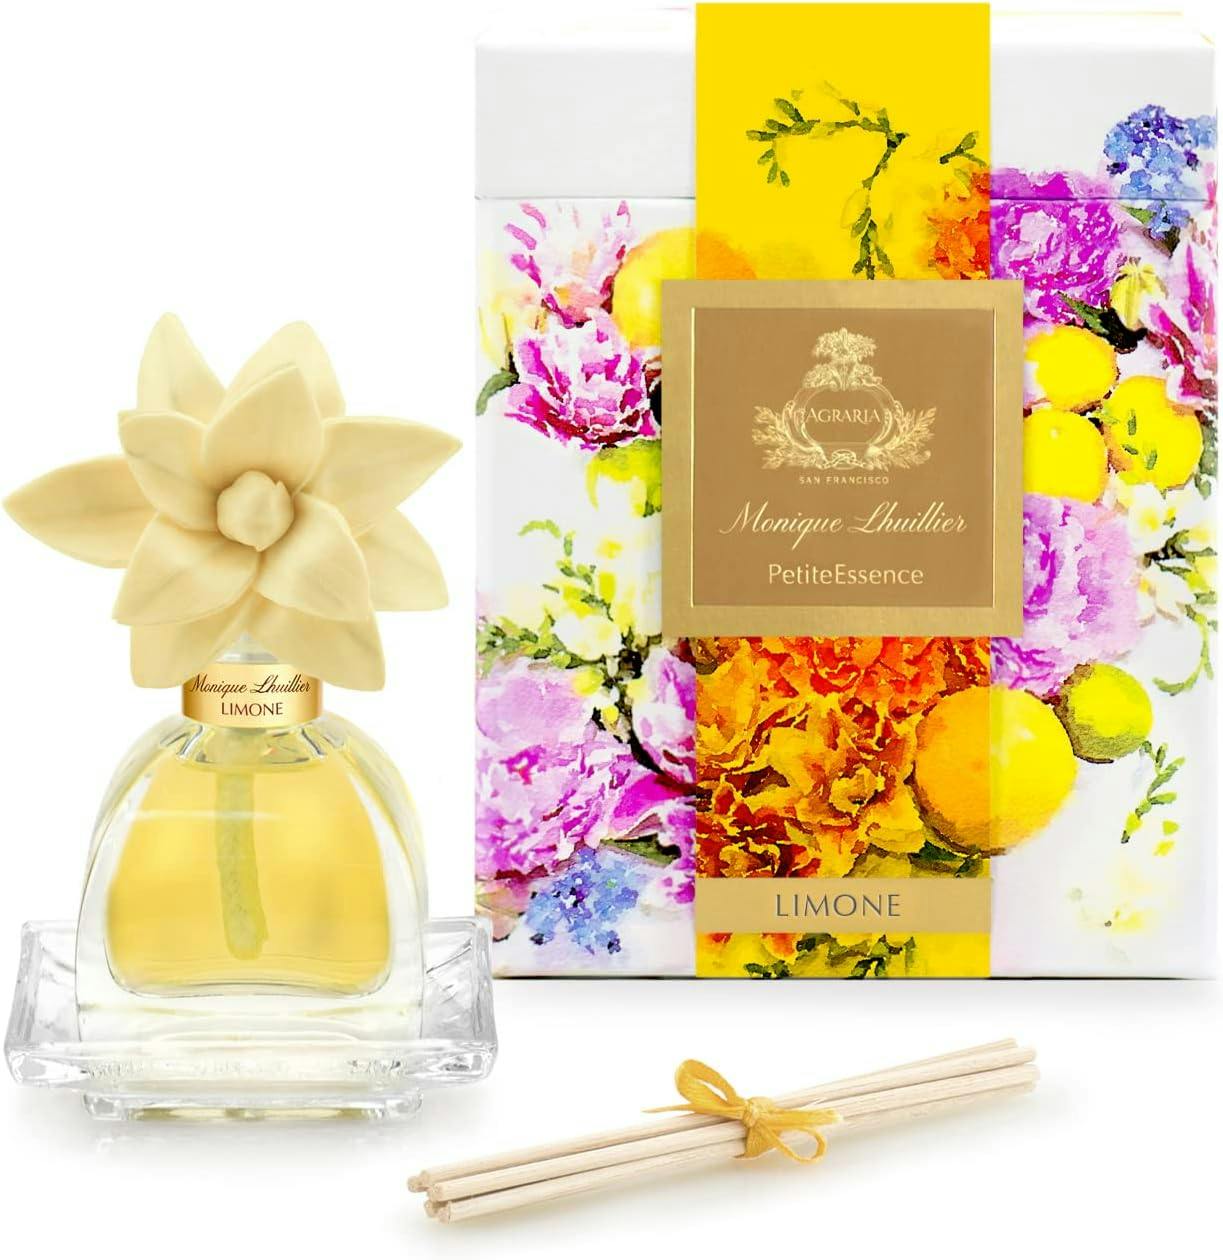 Limone Scented Botanical Oil Reed Diffuser with Handcrafted Sola Flower, 1.7 oz